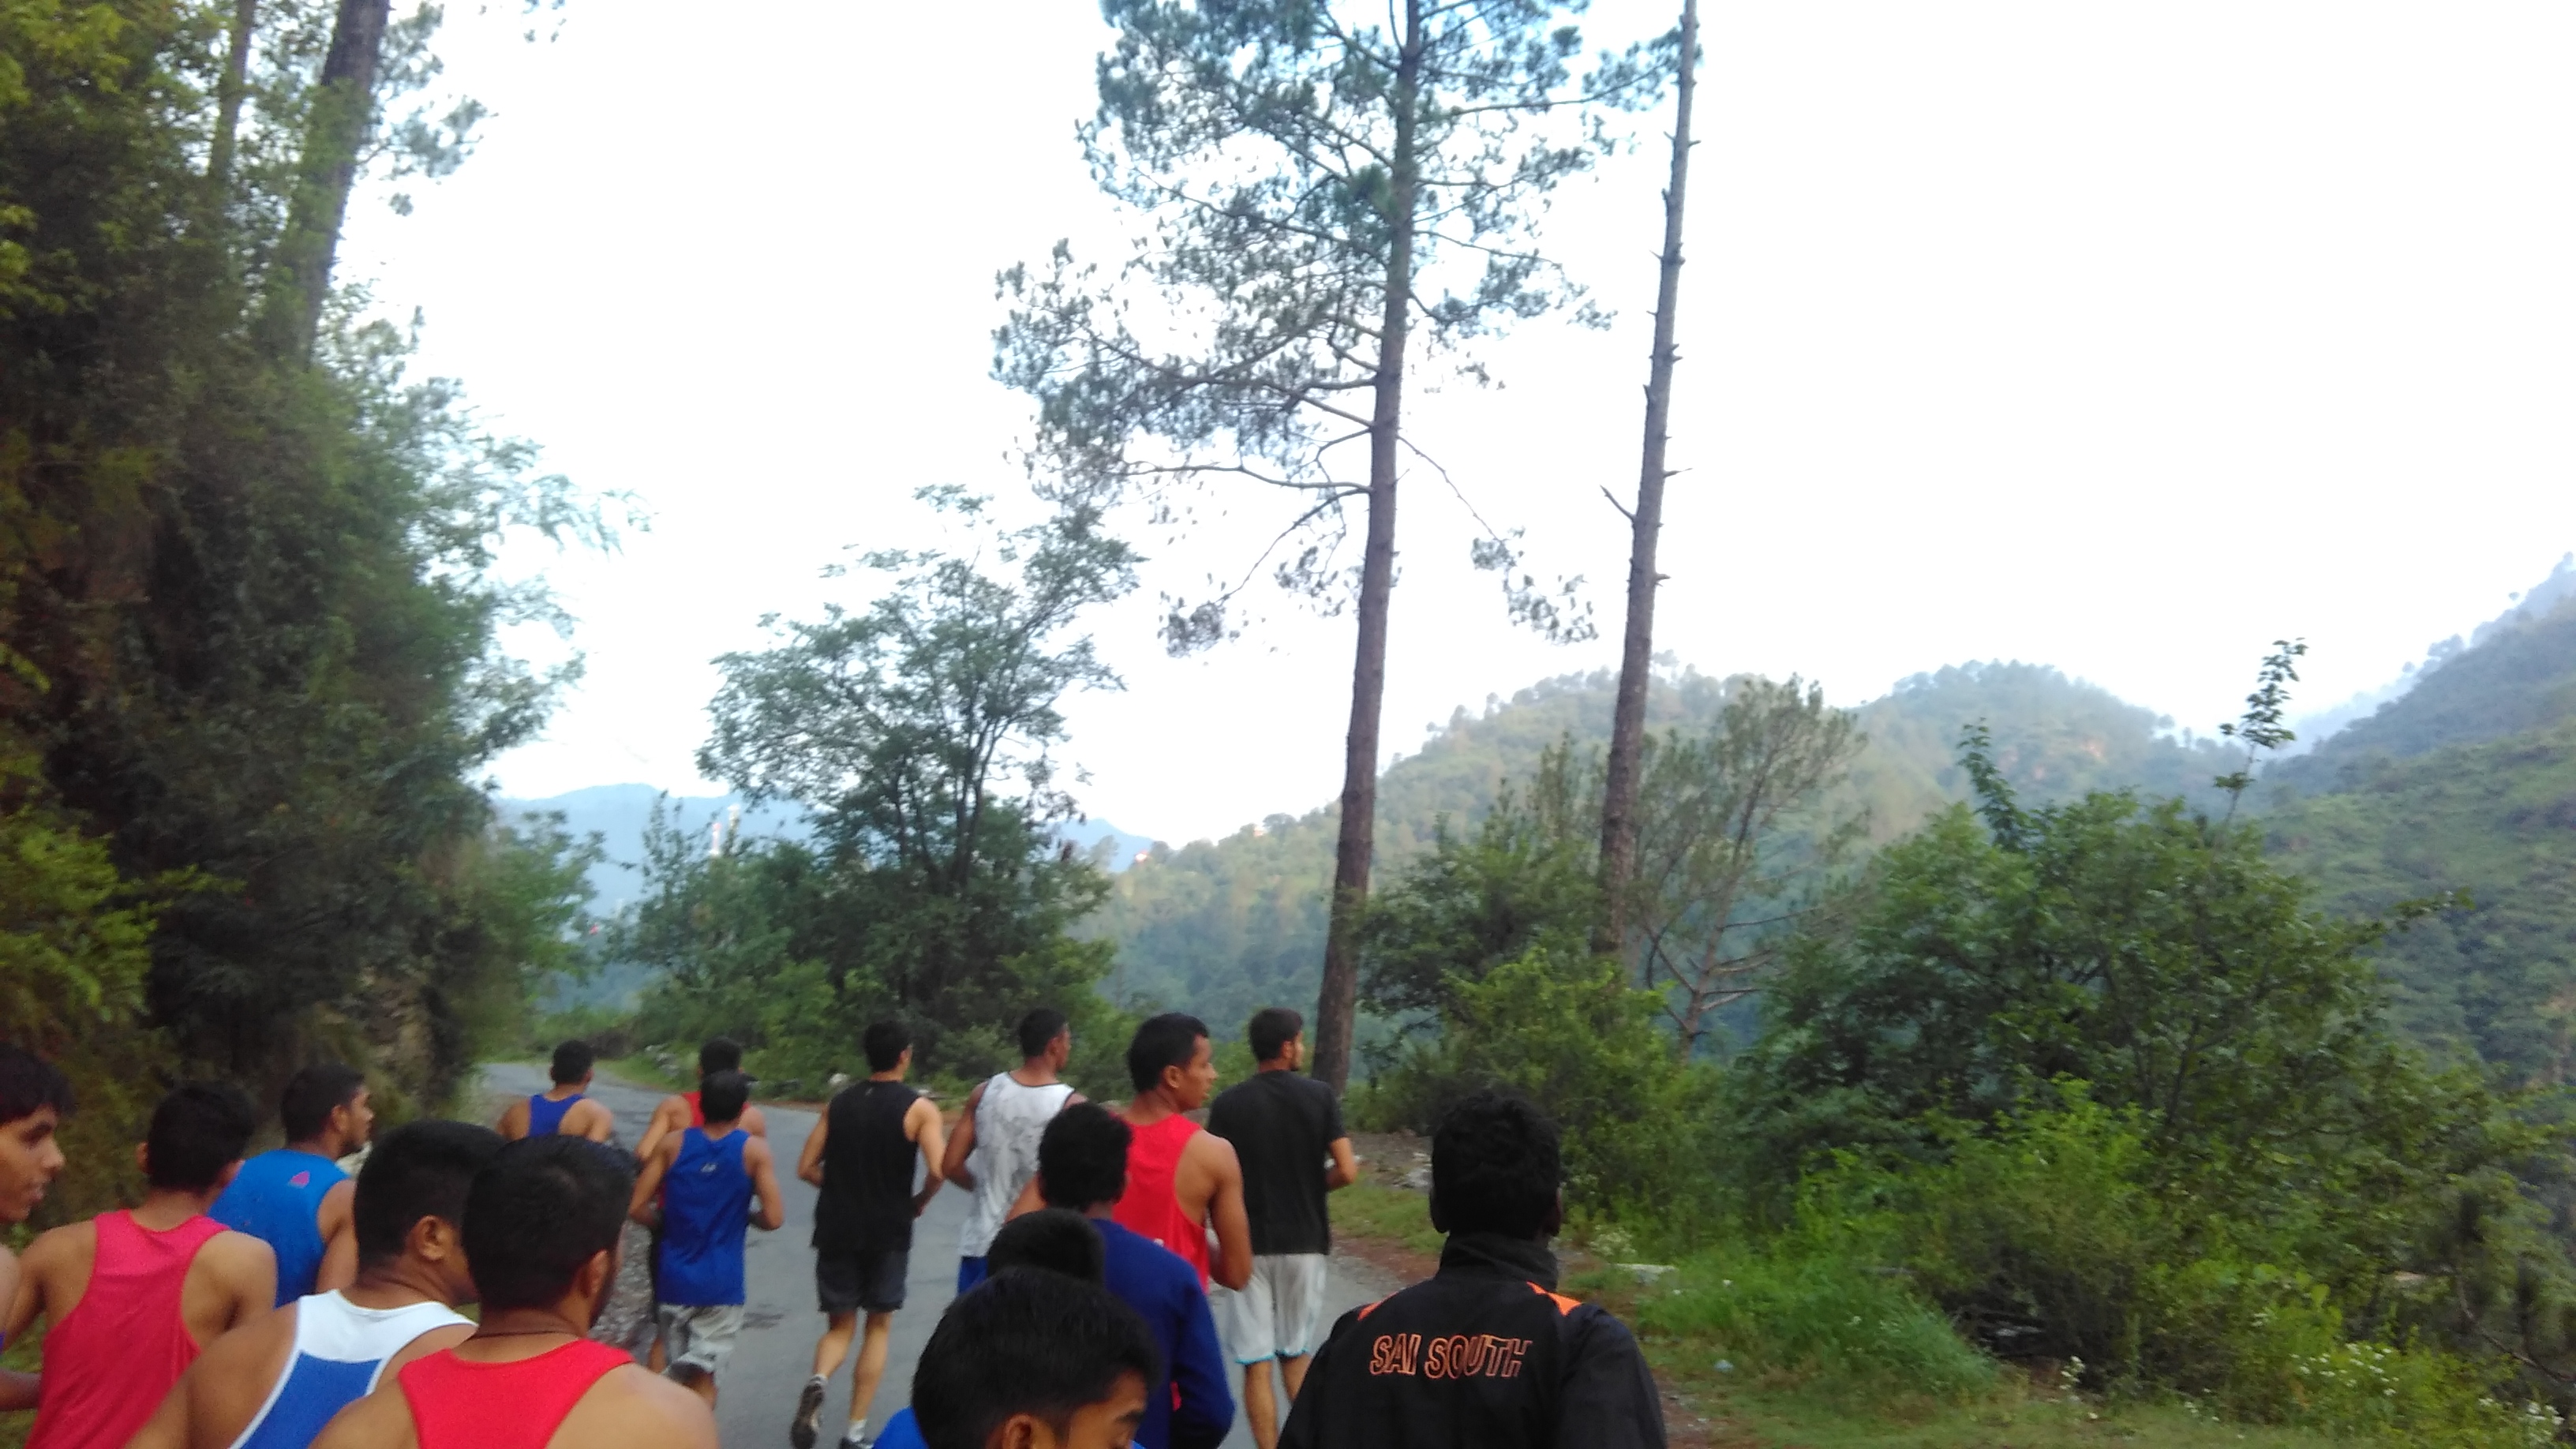 Sports Authority of India National Boxing Academy Rohtak's Trainees During Their Cross Country Run to Chail-2